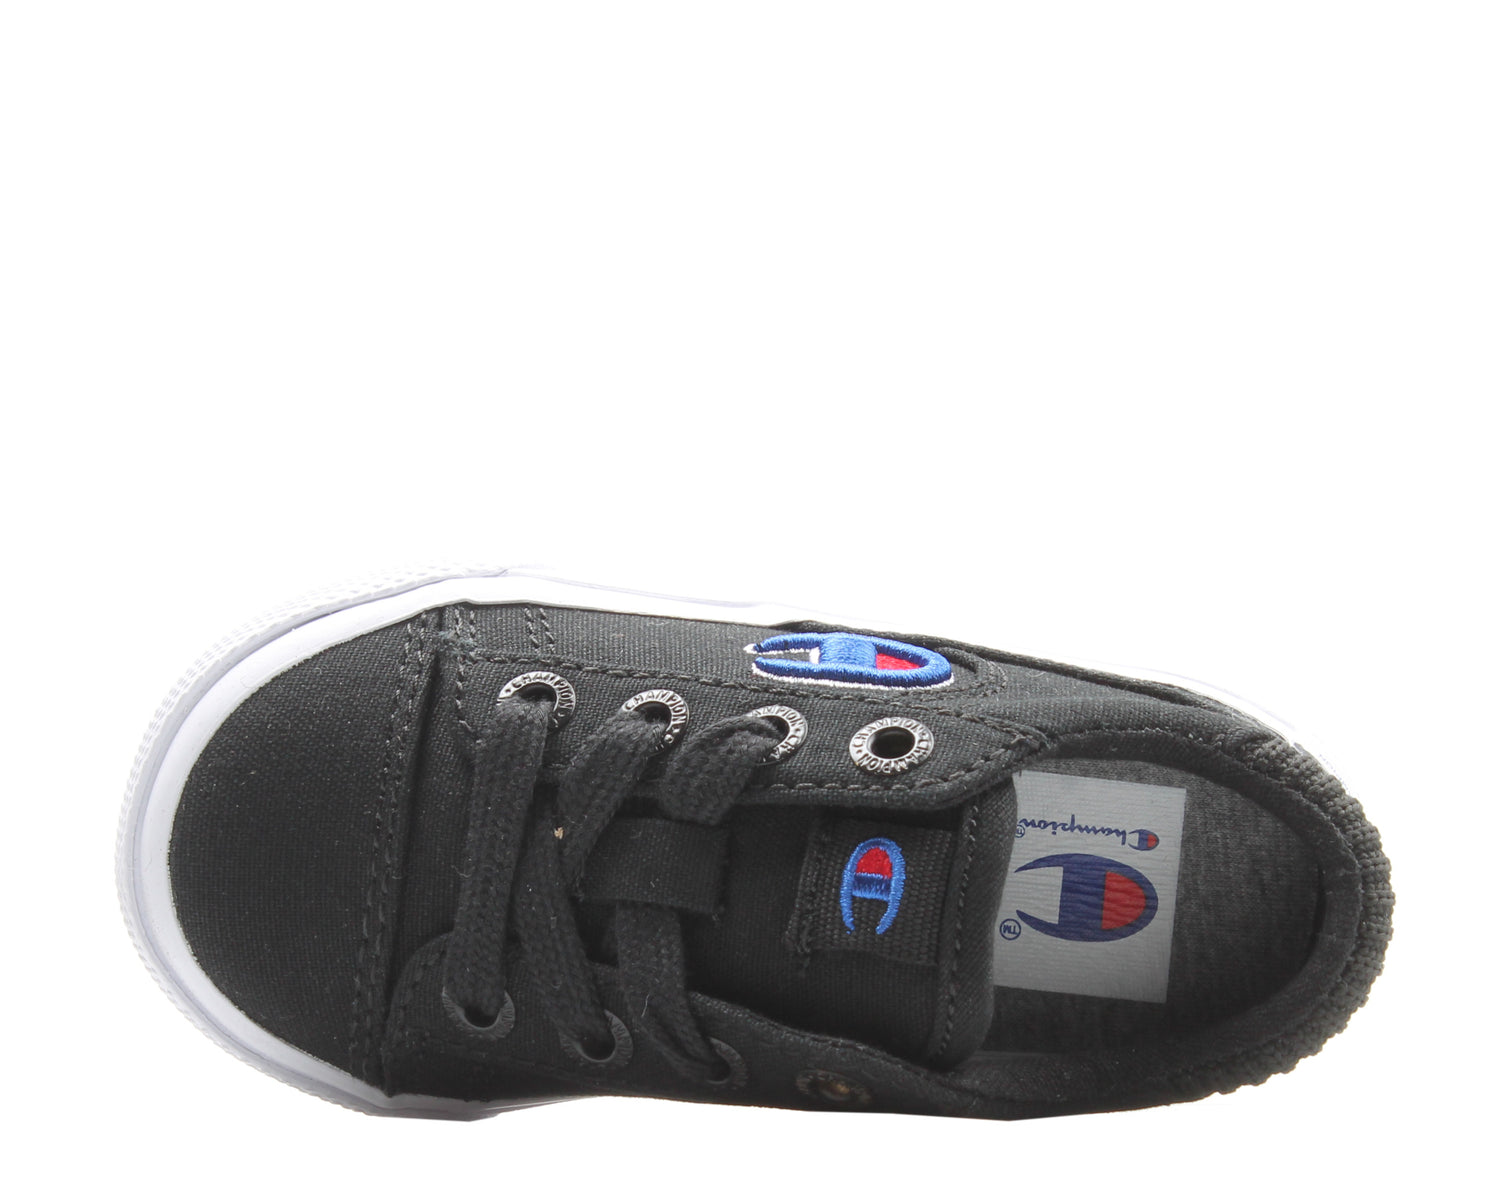 Champion Life™ Fringe Lo Canvas Toddler-Baby Sneakers